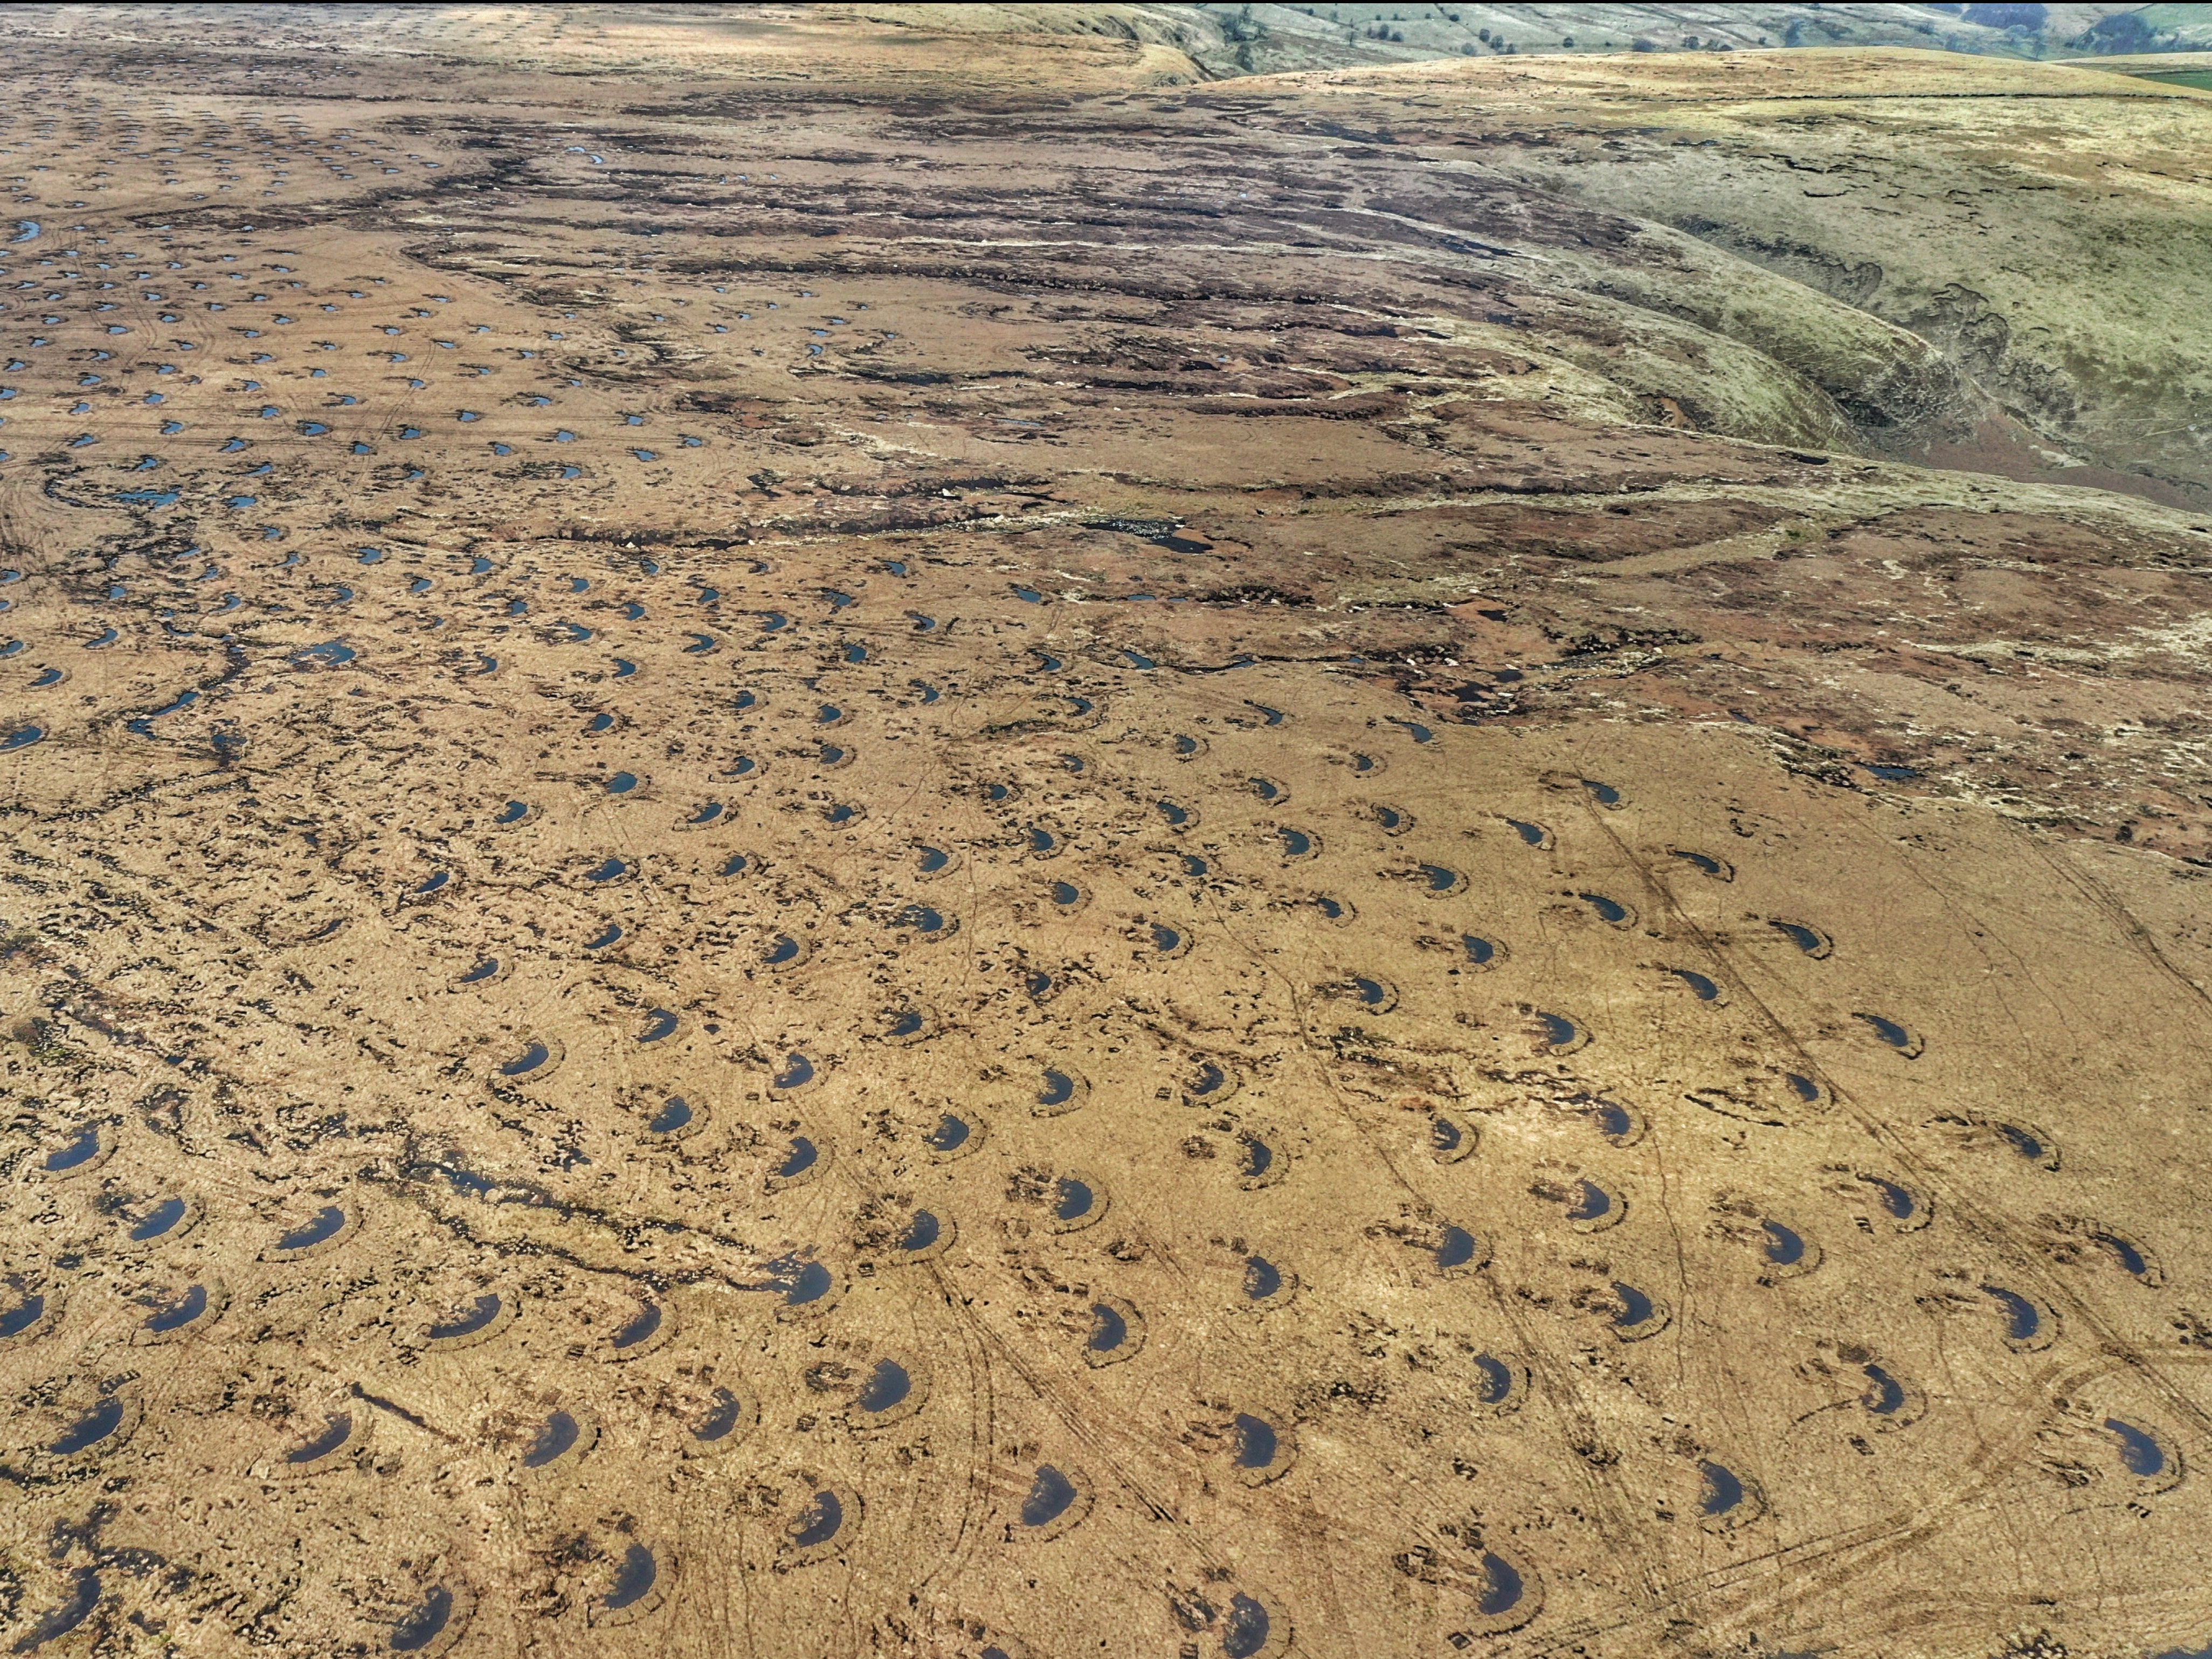 Aerial view of Halcombe Moor, near Manchester, where thousands of ‘peat bunds’ are visible